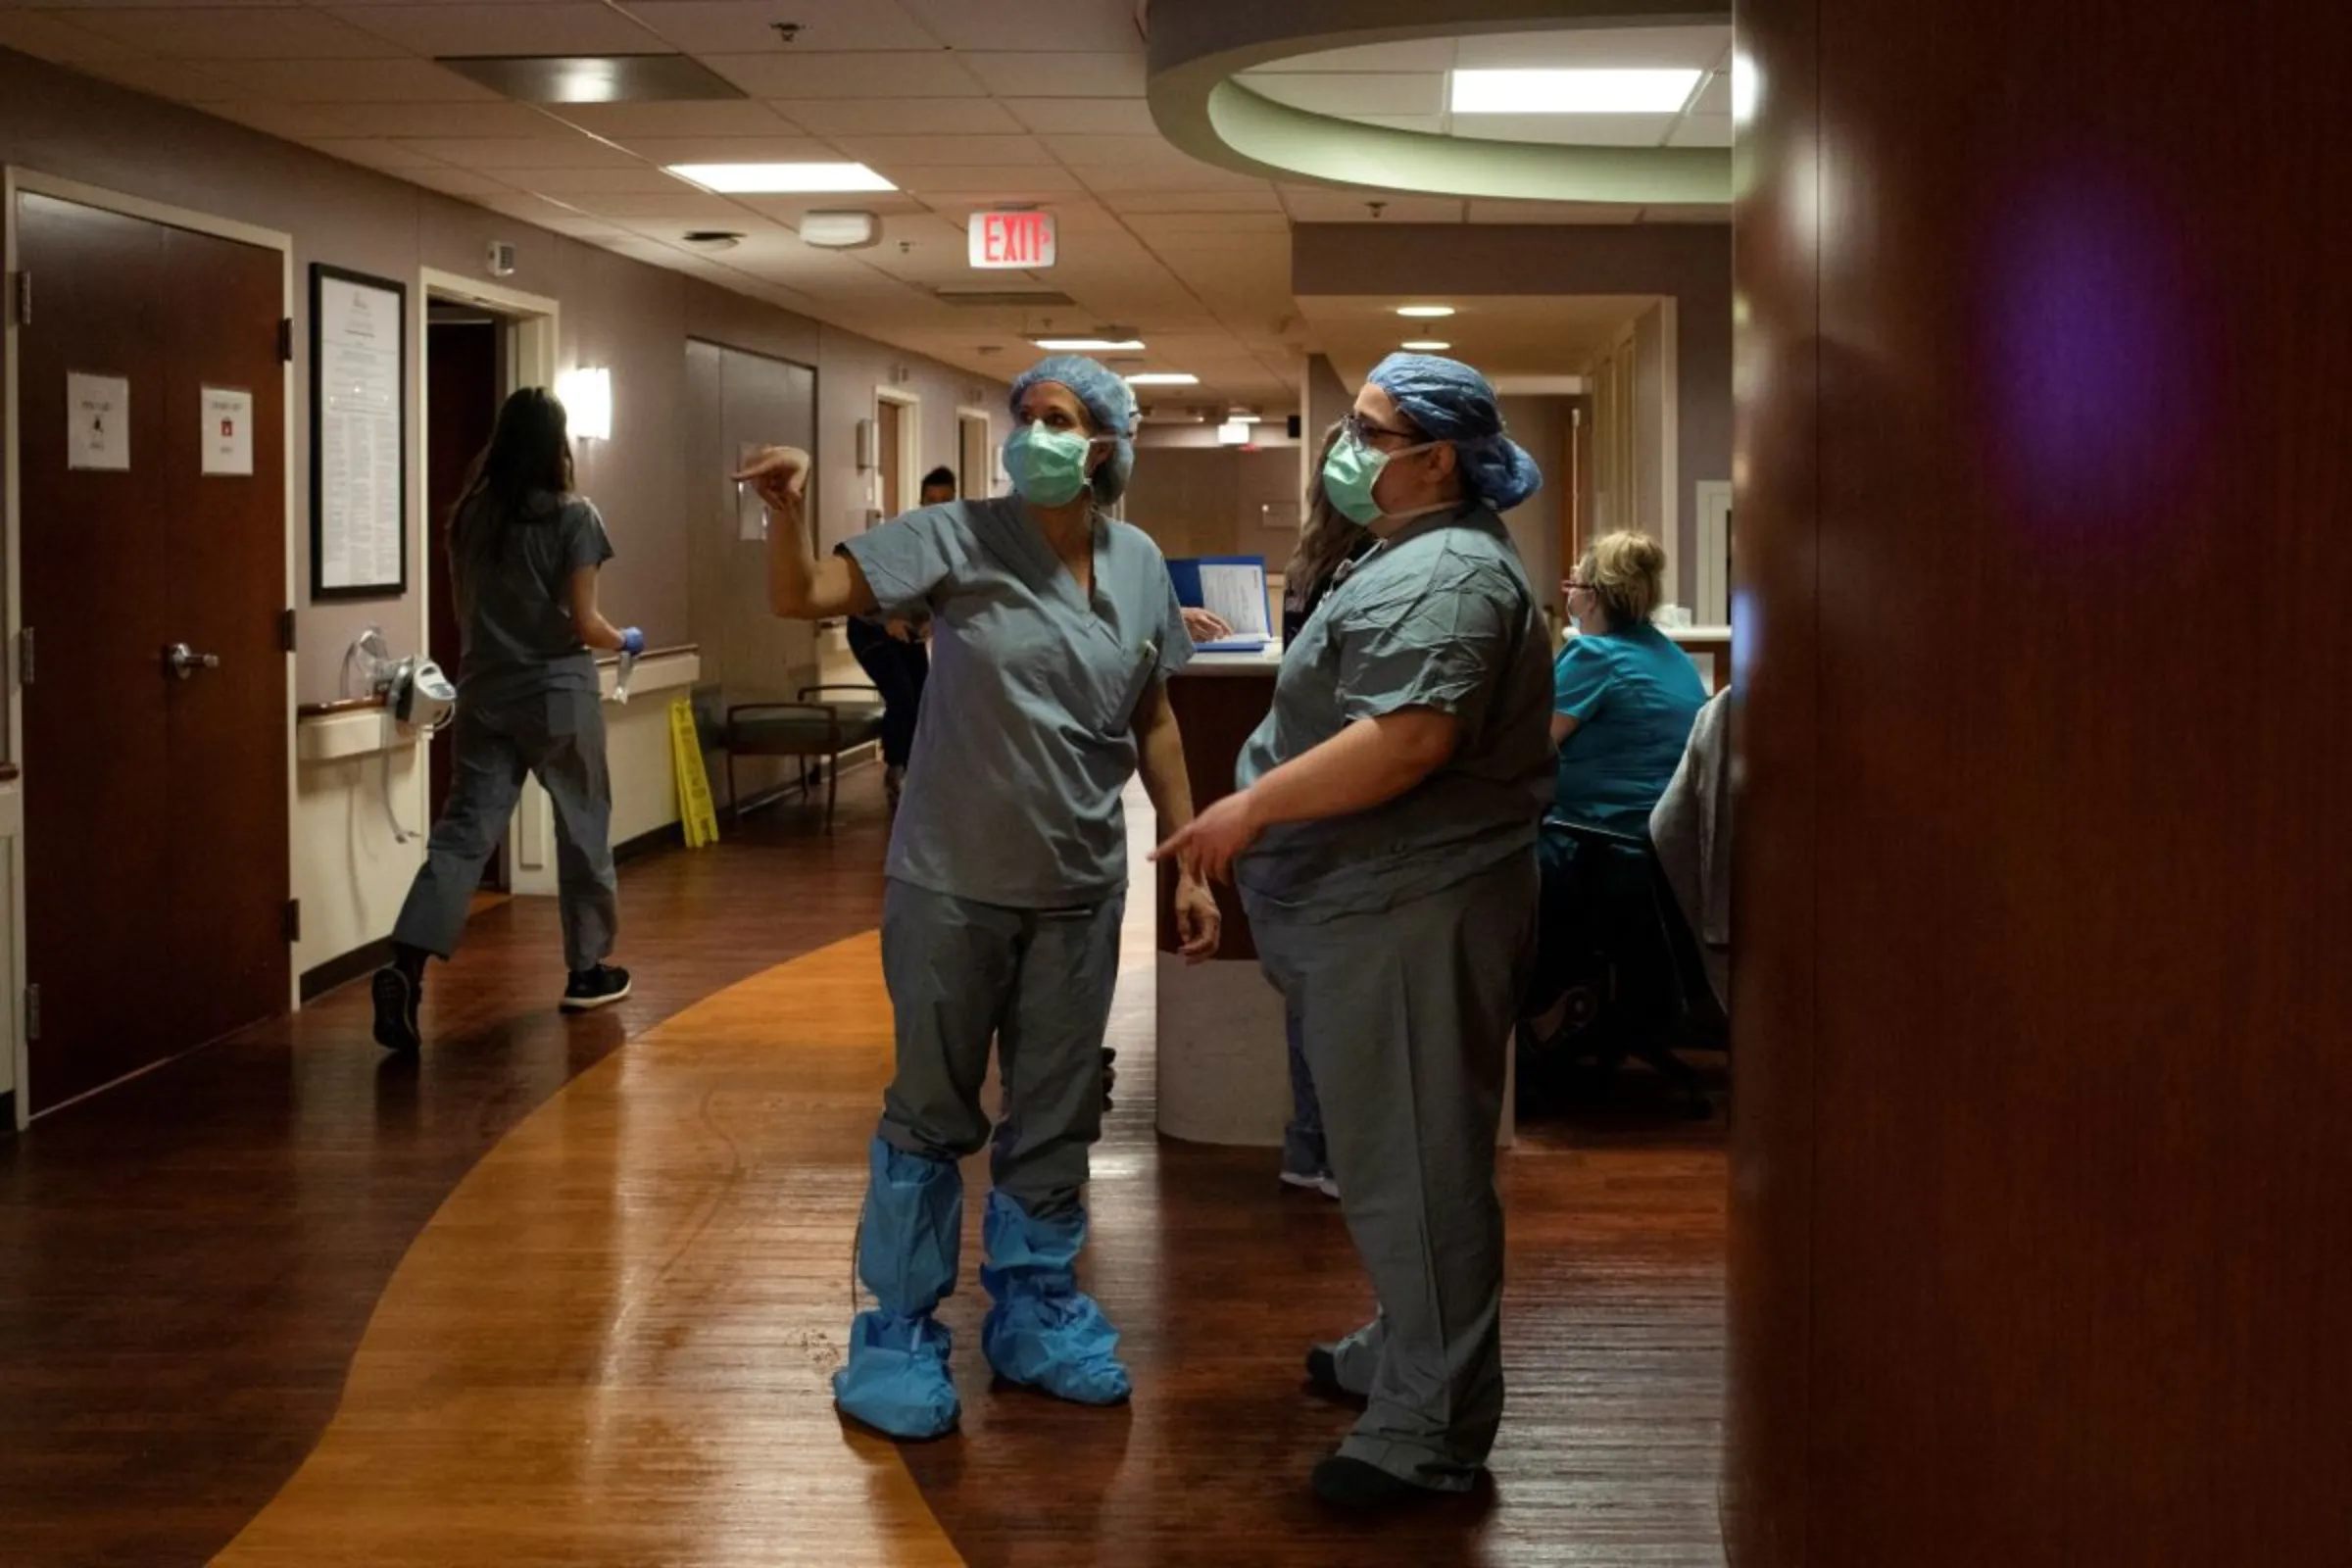 A doctor and nurse consult in the hallway as a patient prepares to be transferred for an emergency C-section in the Family Birth Center at Beaumont Hospital in Royal Oak, Michigan, U.S., February 1, 2022